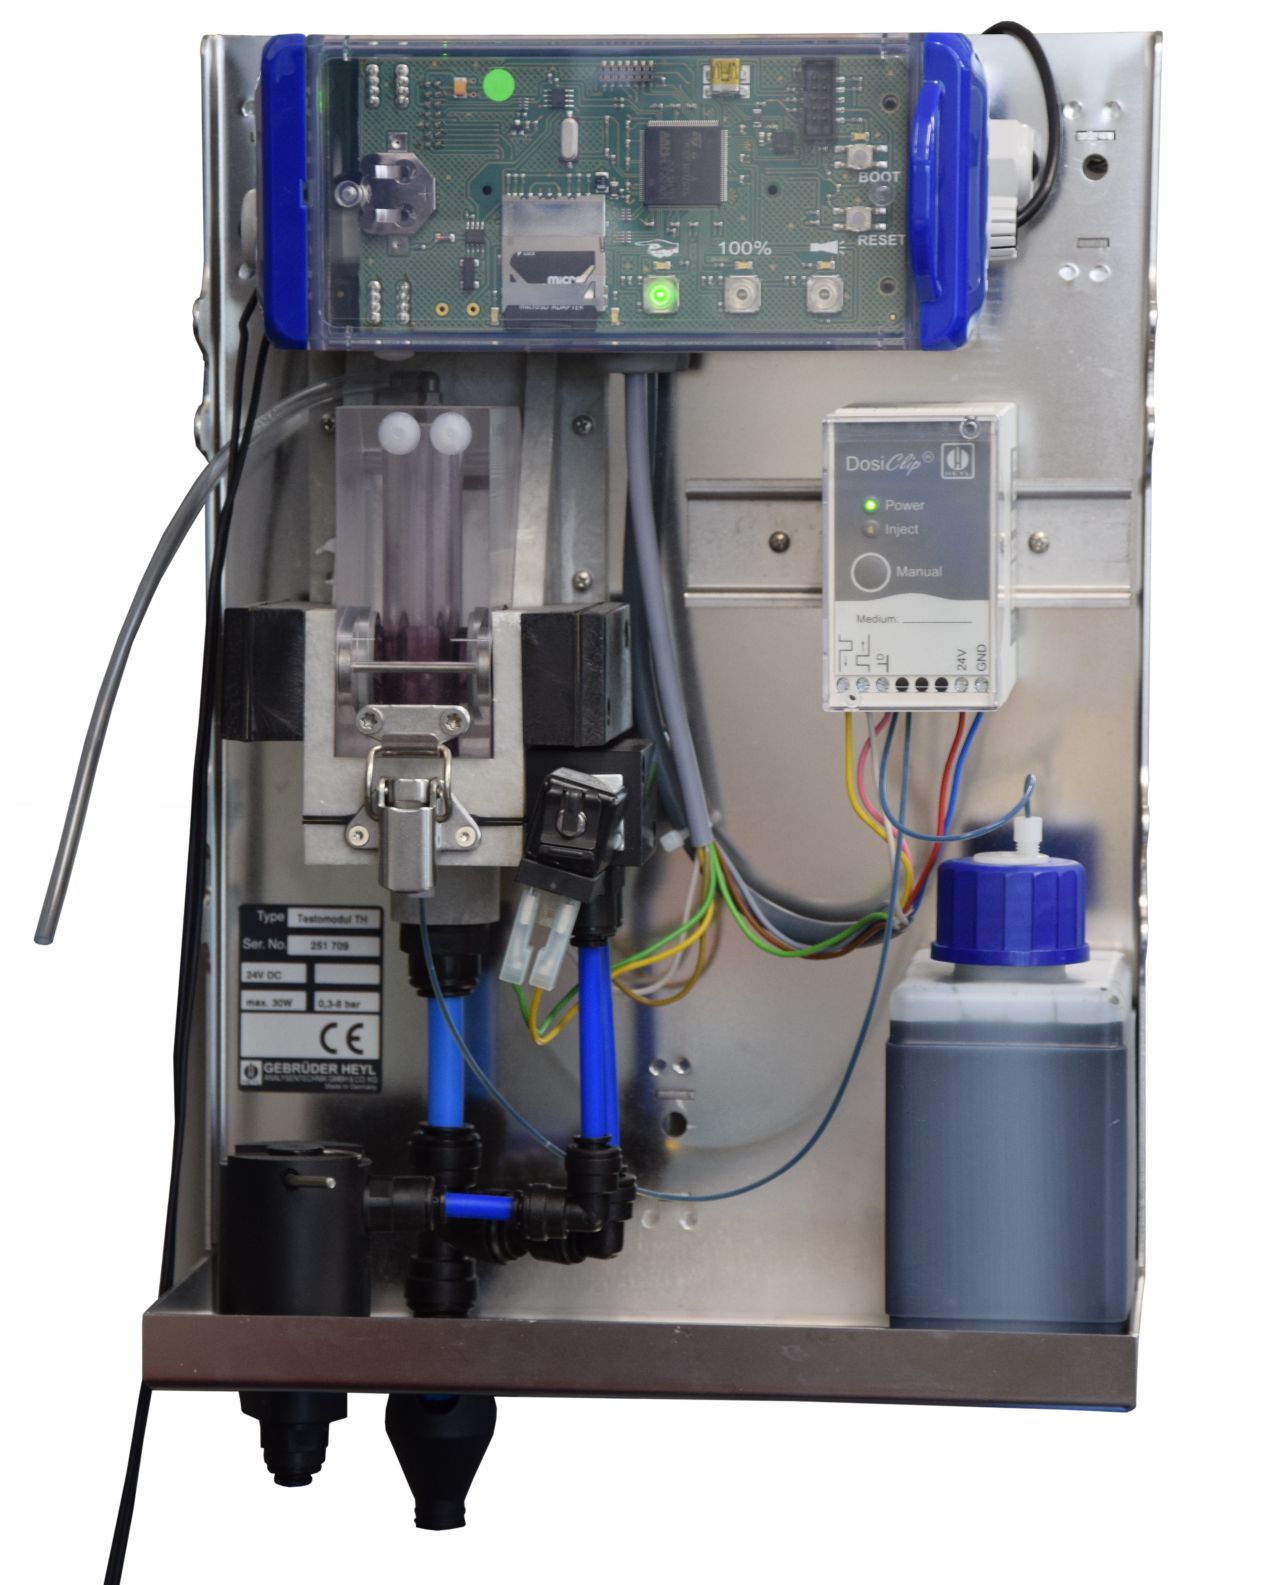 The new Testomat generation for multiparameter systems - The Testomat Lab